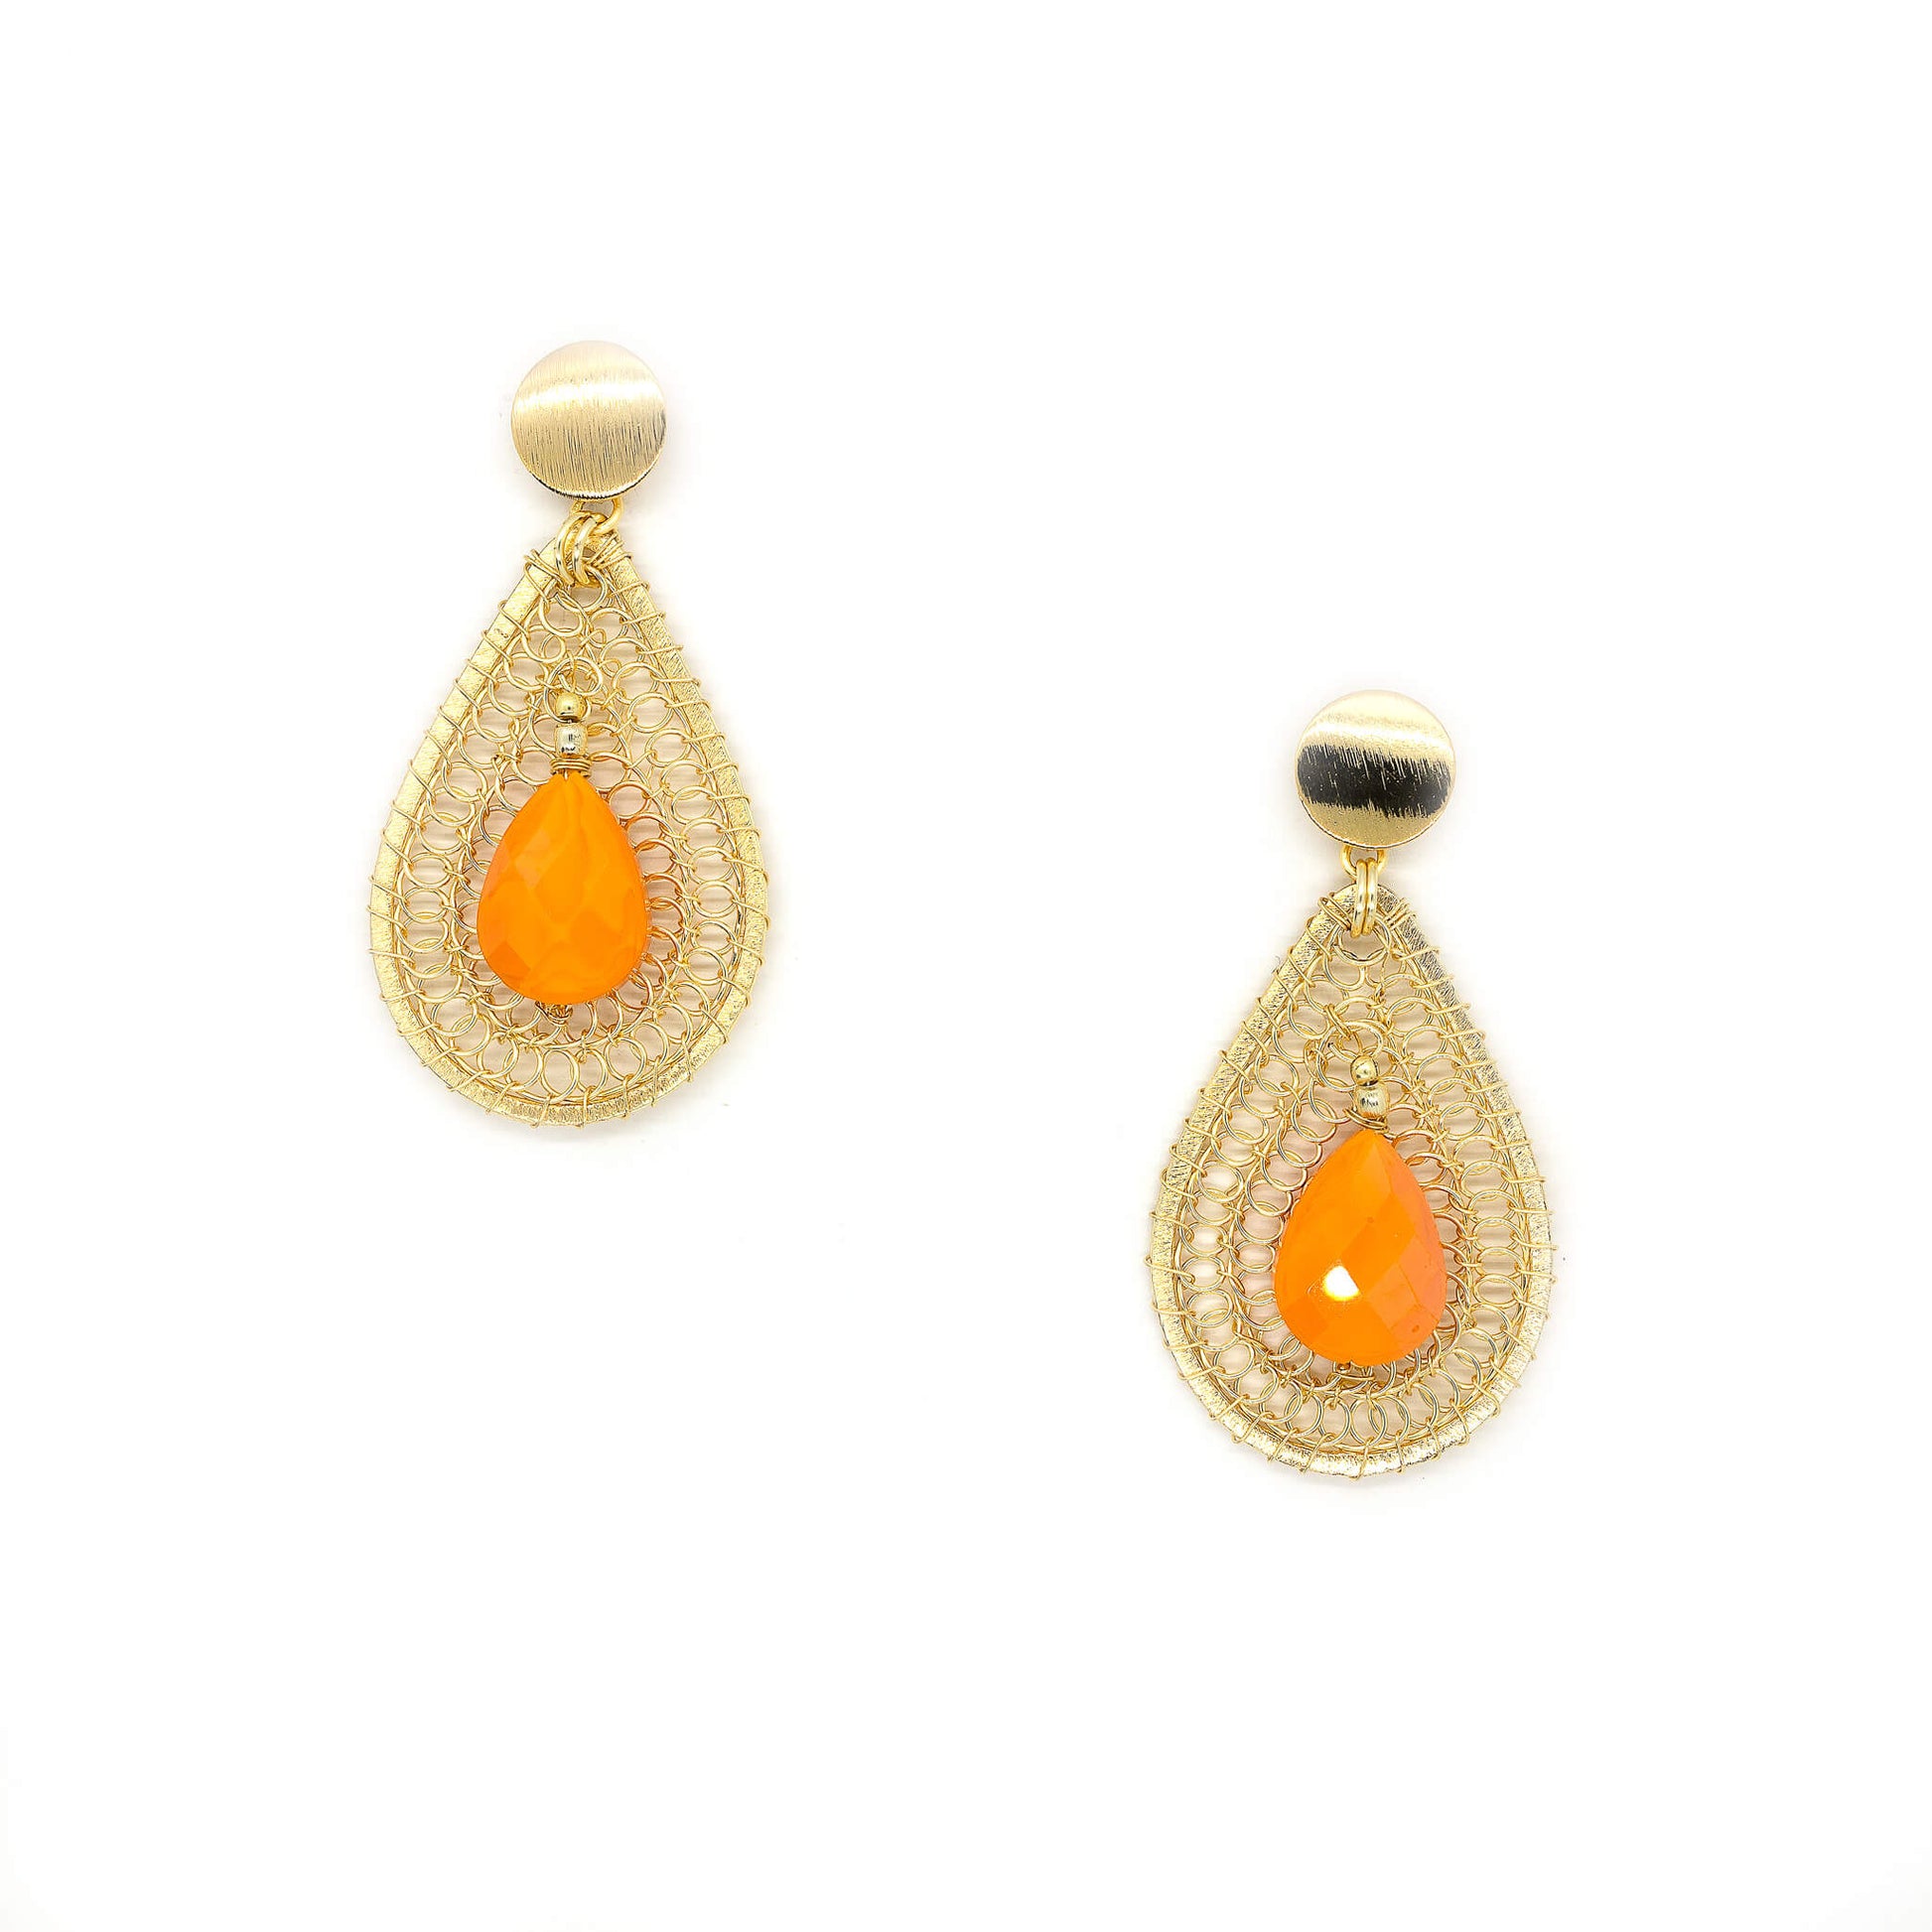 Devasshree dangle Earrings are 2.5 inches long. Gold and Orange earrings. Handmade with non-tarnish gold plated wire and Crystal Beads. Teardrop wire wrapped Earrings.